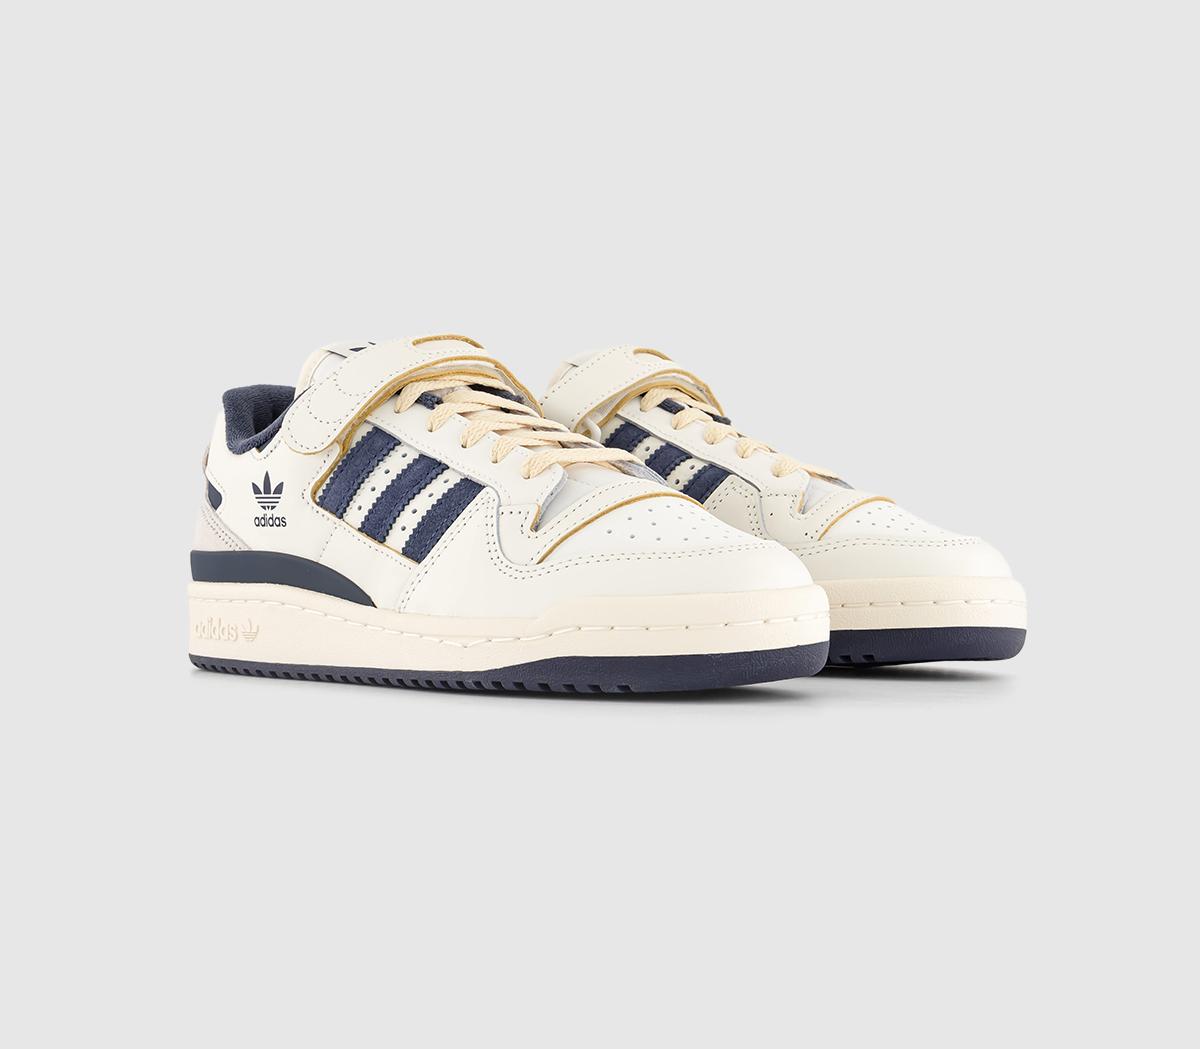 Adidas Womens Forum 84 Low Trainers Offwhite Shadow Navy Cream White, 9.5